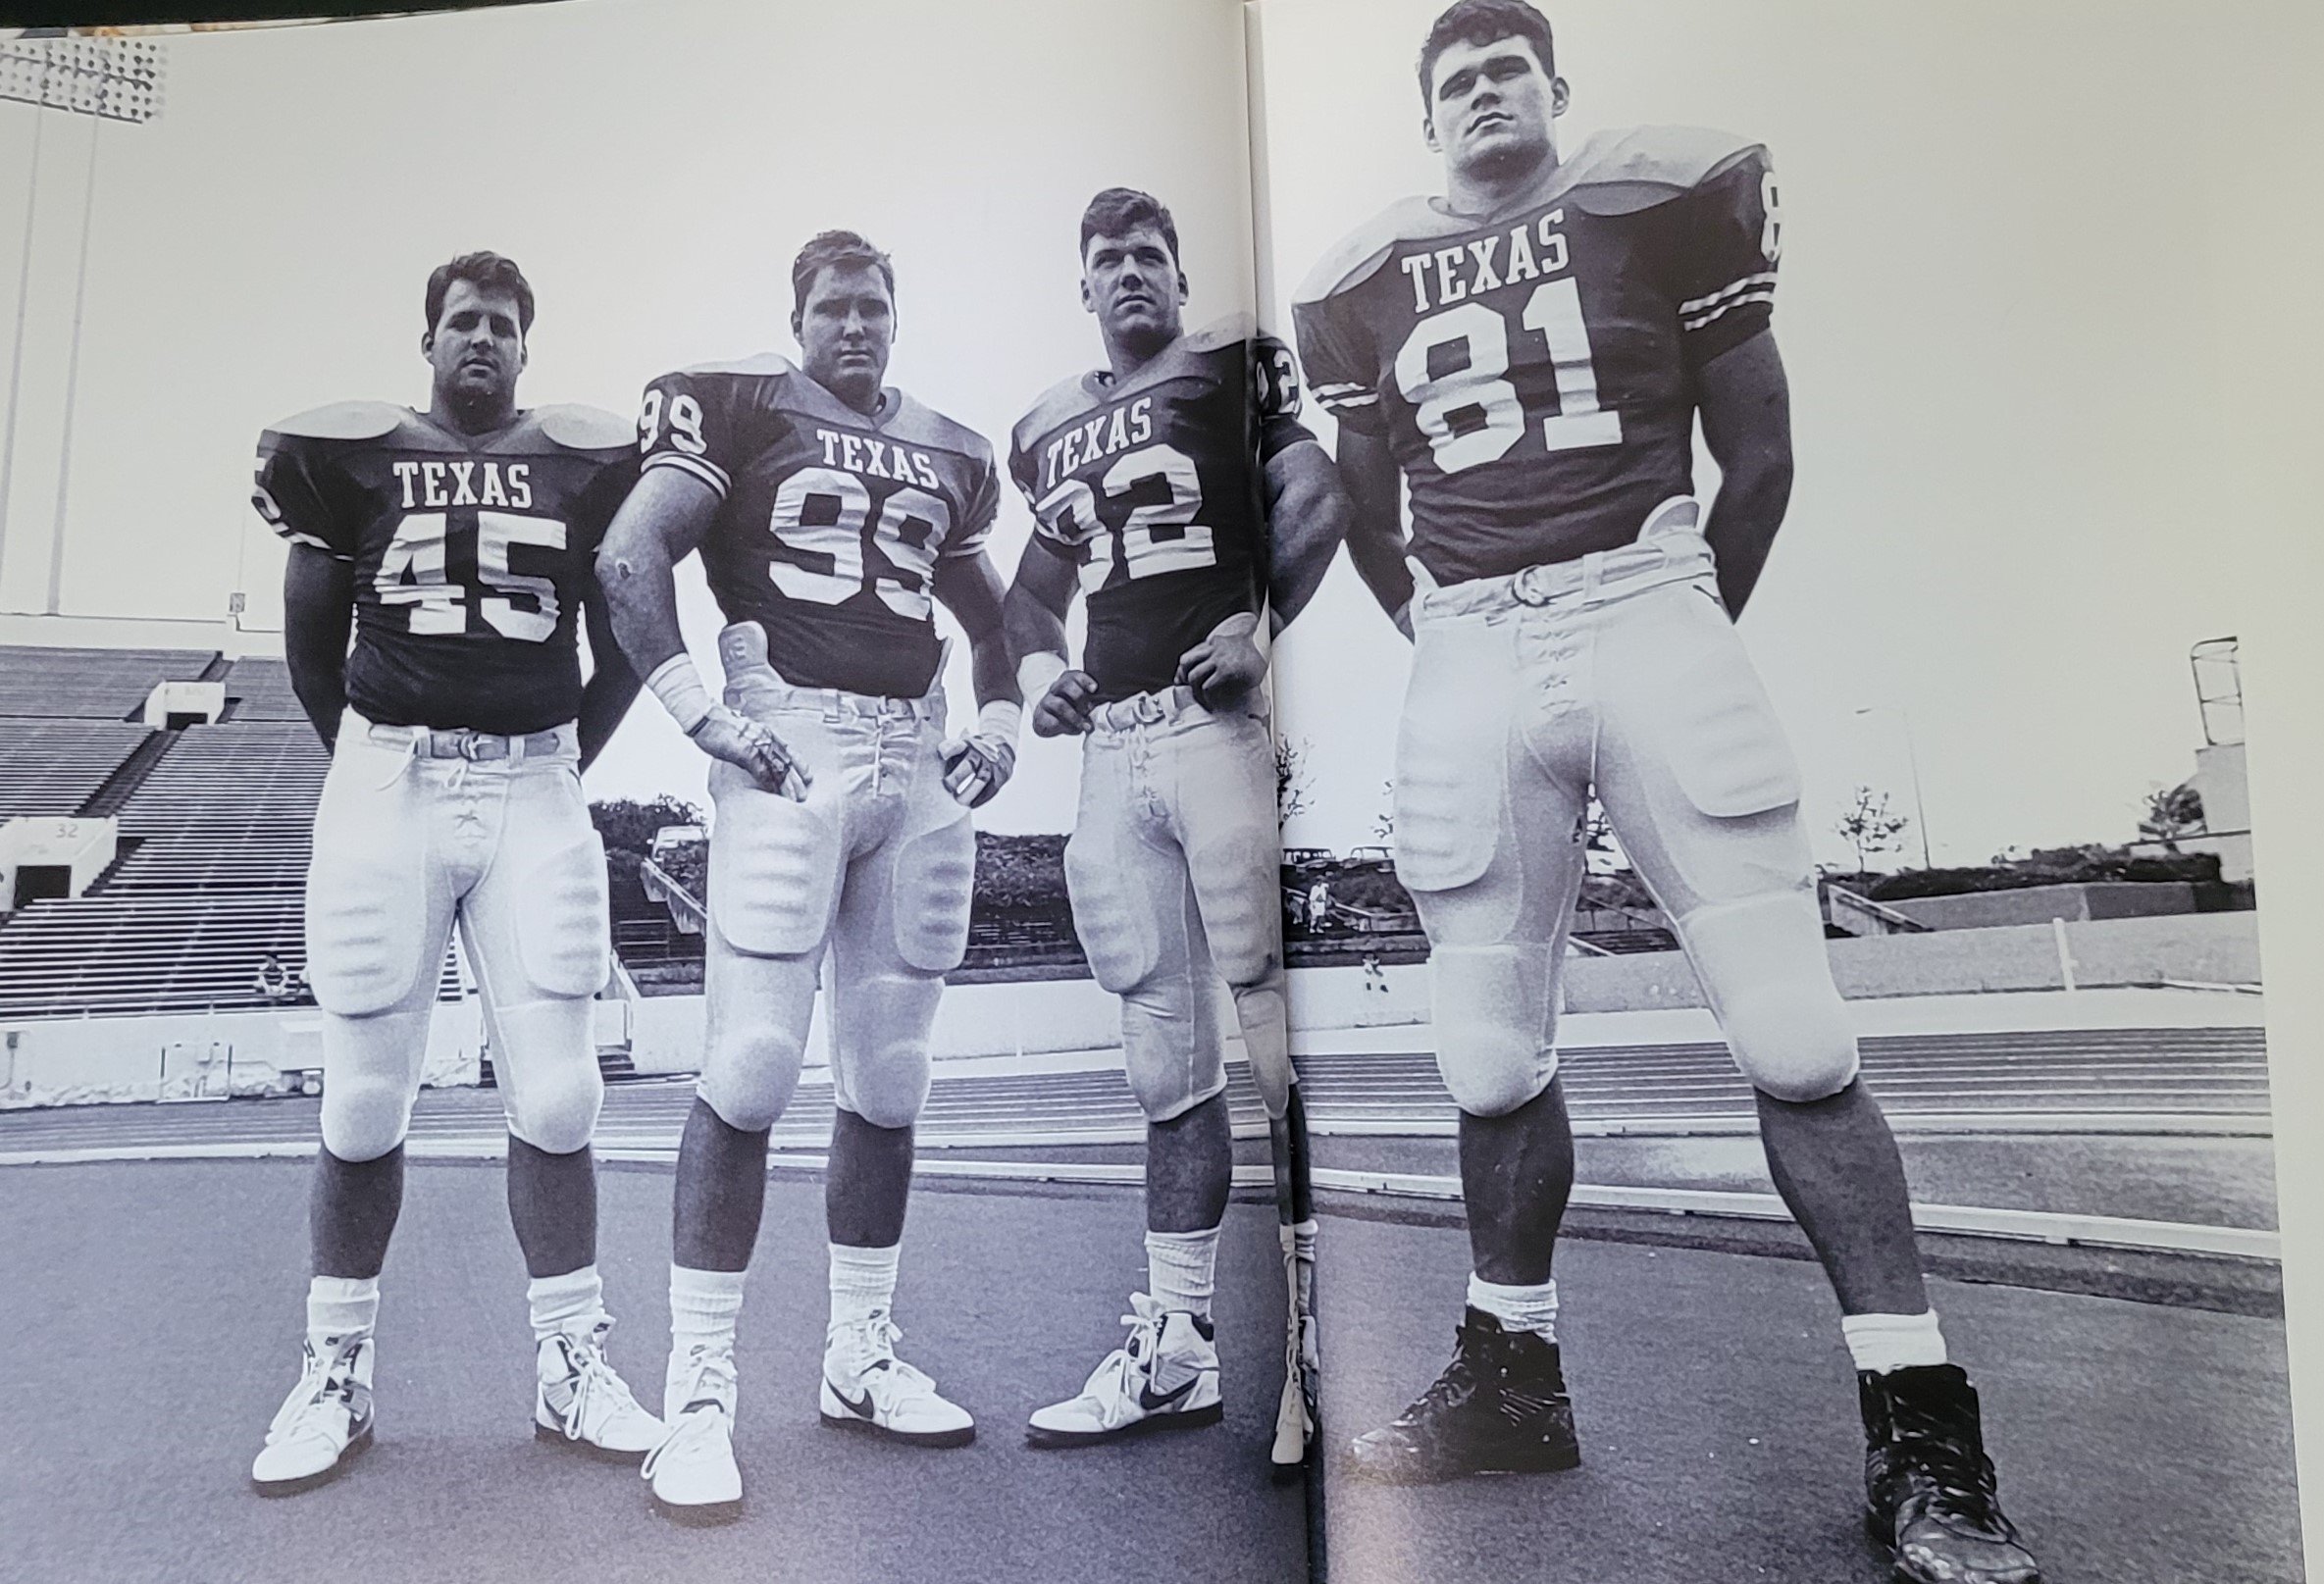  1991  Bo Robinson, Tommy Jeter, James Patton, and consensus All-American Shane Dronett  Jeter, Patton, and Dronett were drafted.  